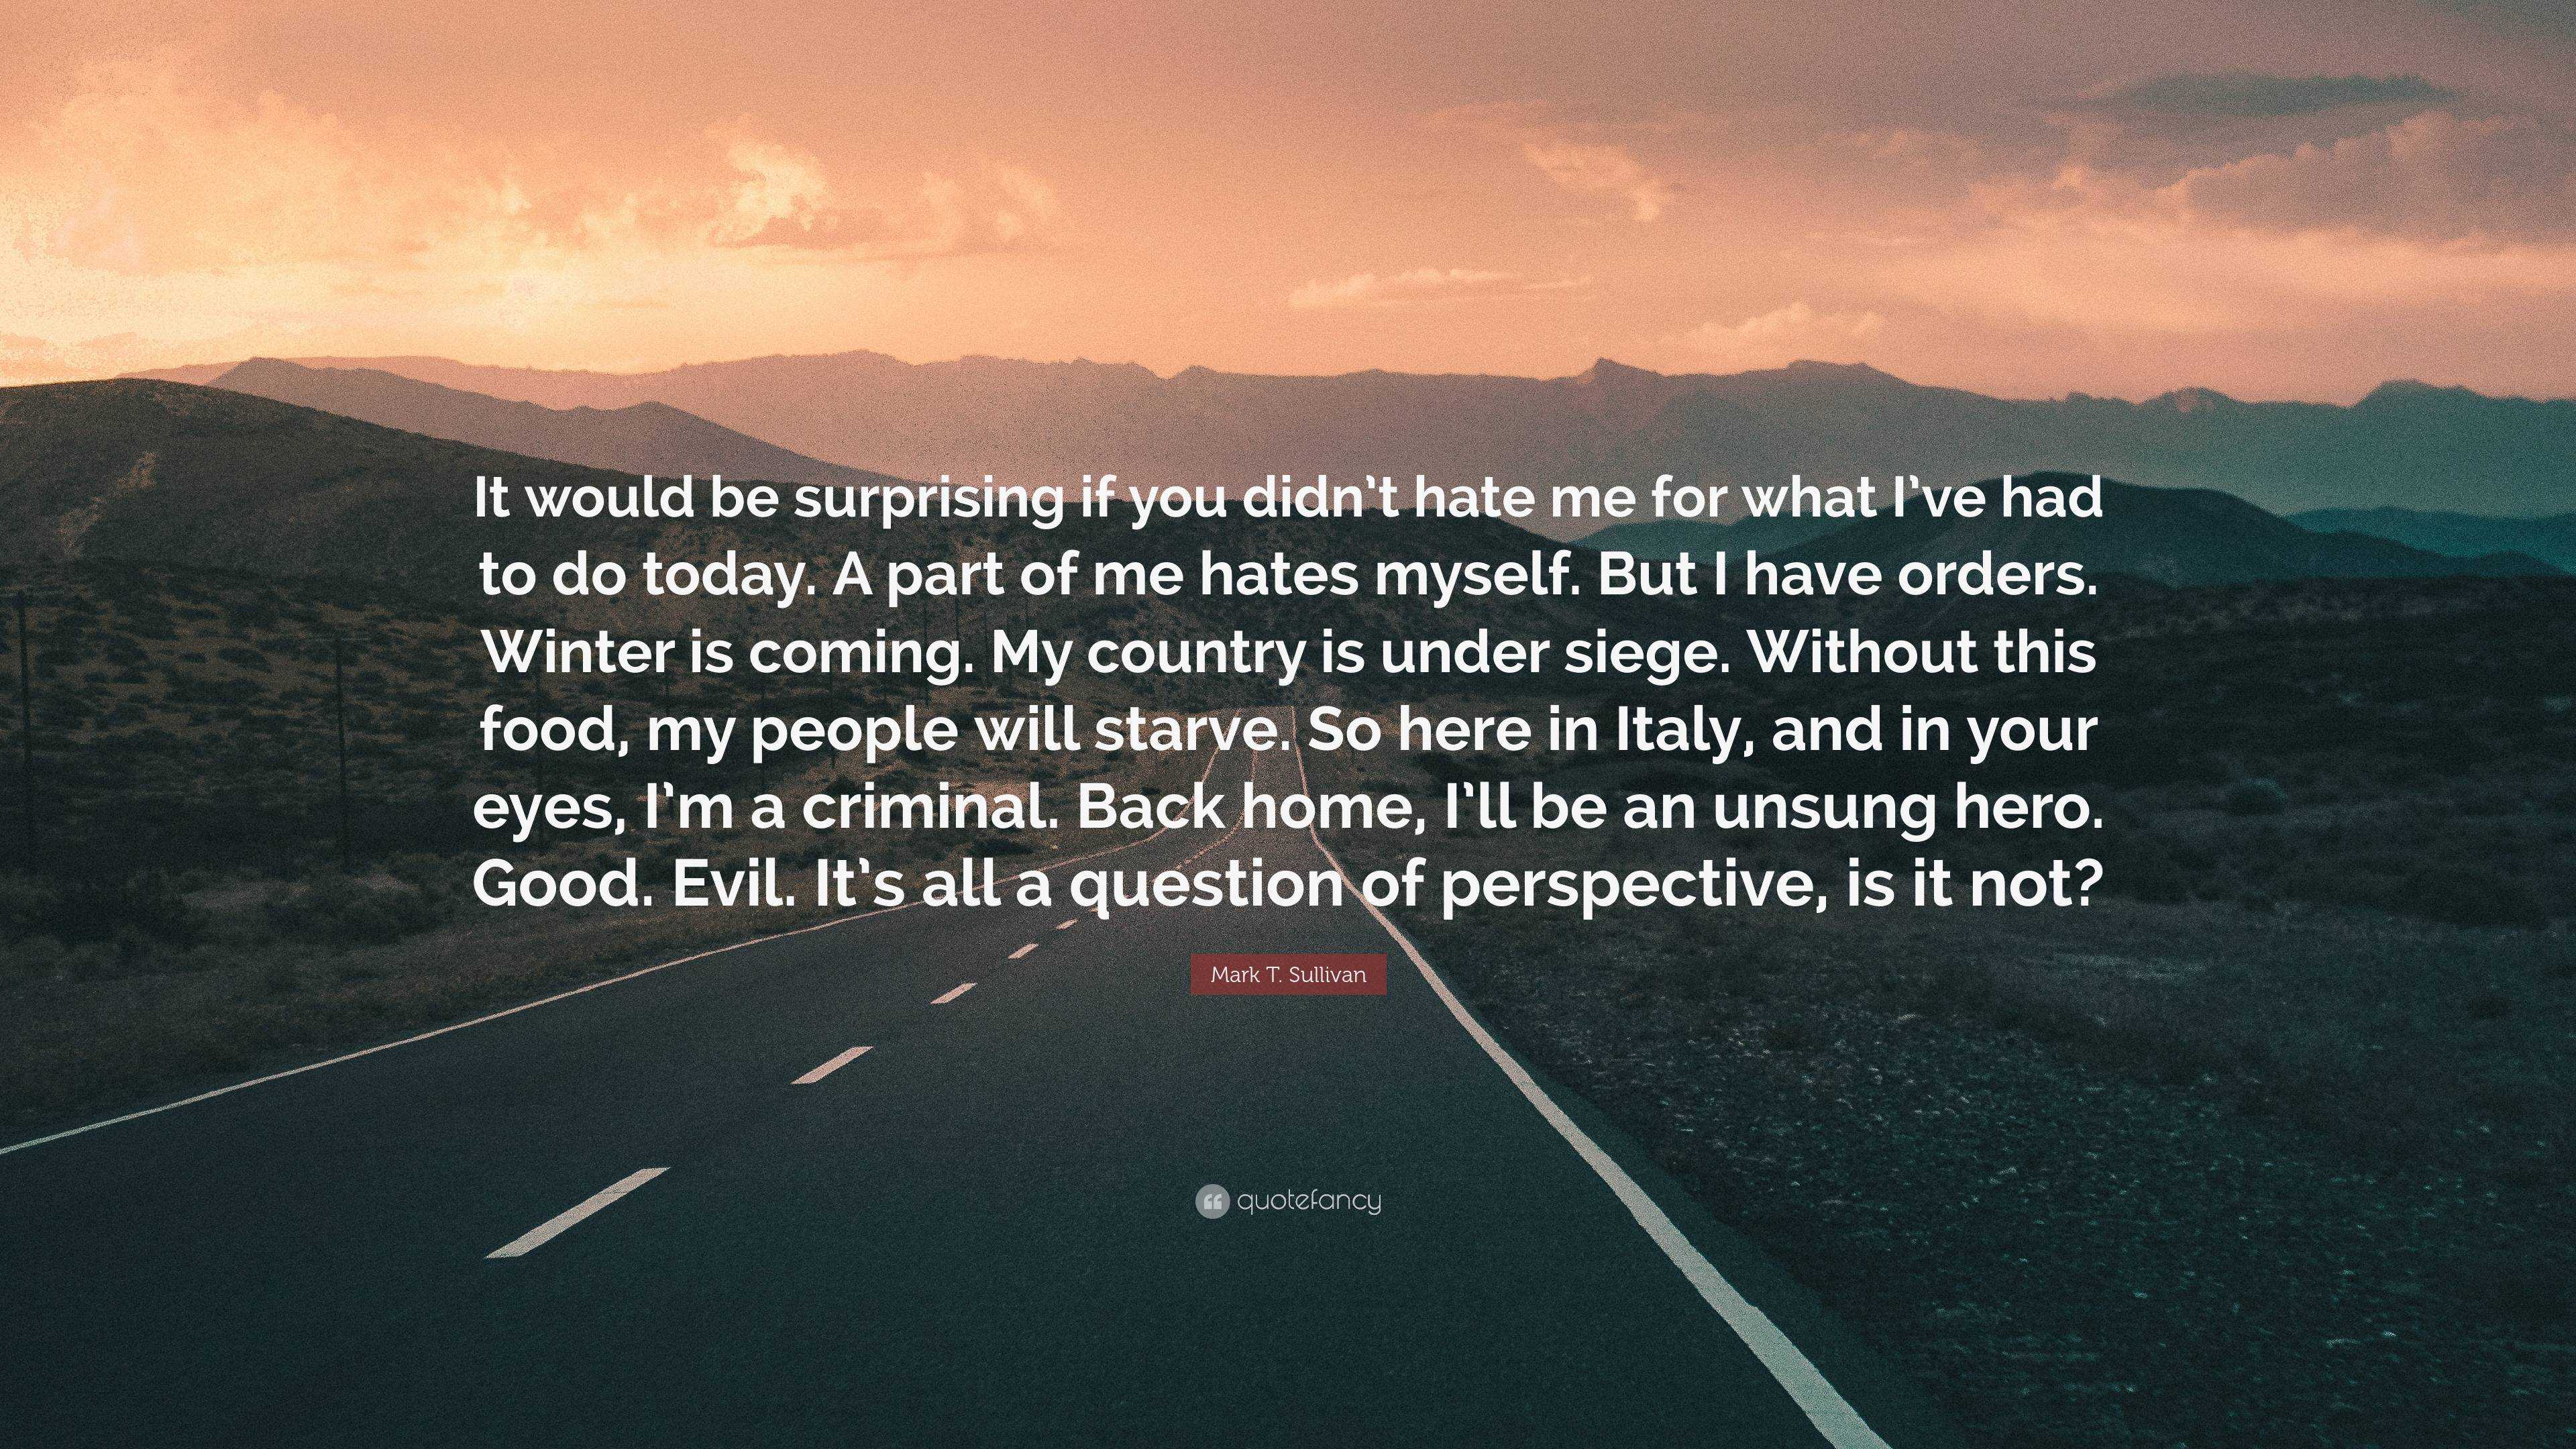 https://quotefancy.com/media/wallpaper/3840x2160/6476162-Mark-T-Sullivan-Quote-It-would-be-surprising-if-you-didn-t-hate-me.jpg